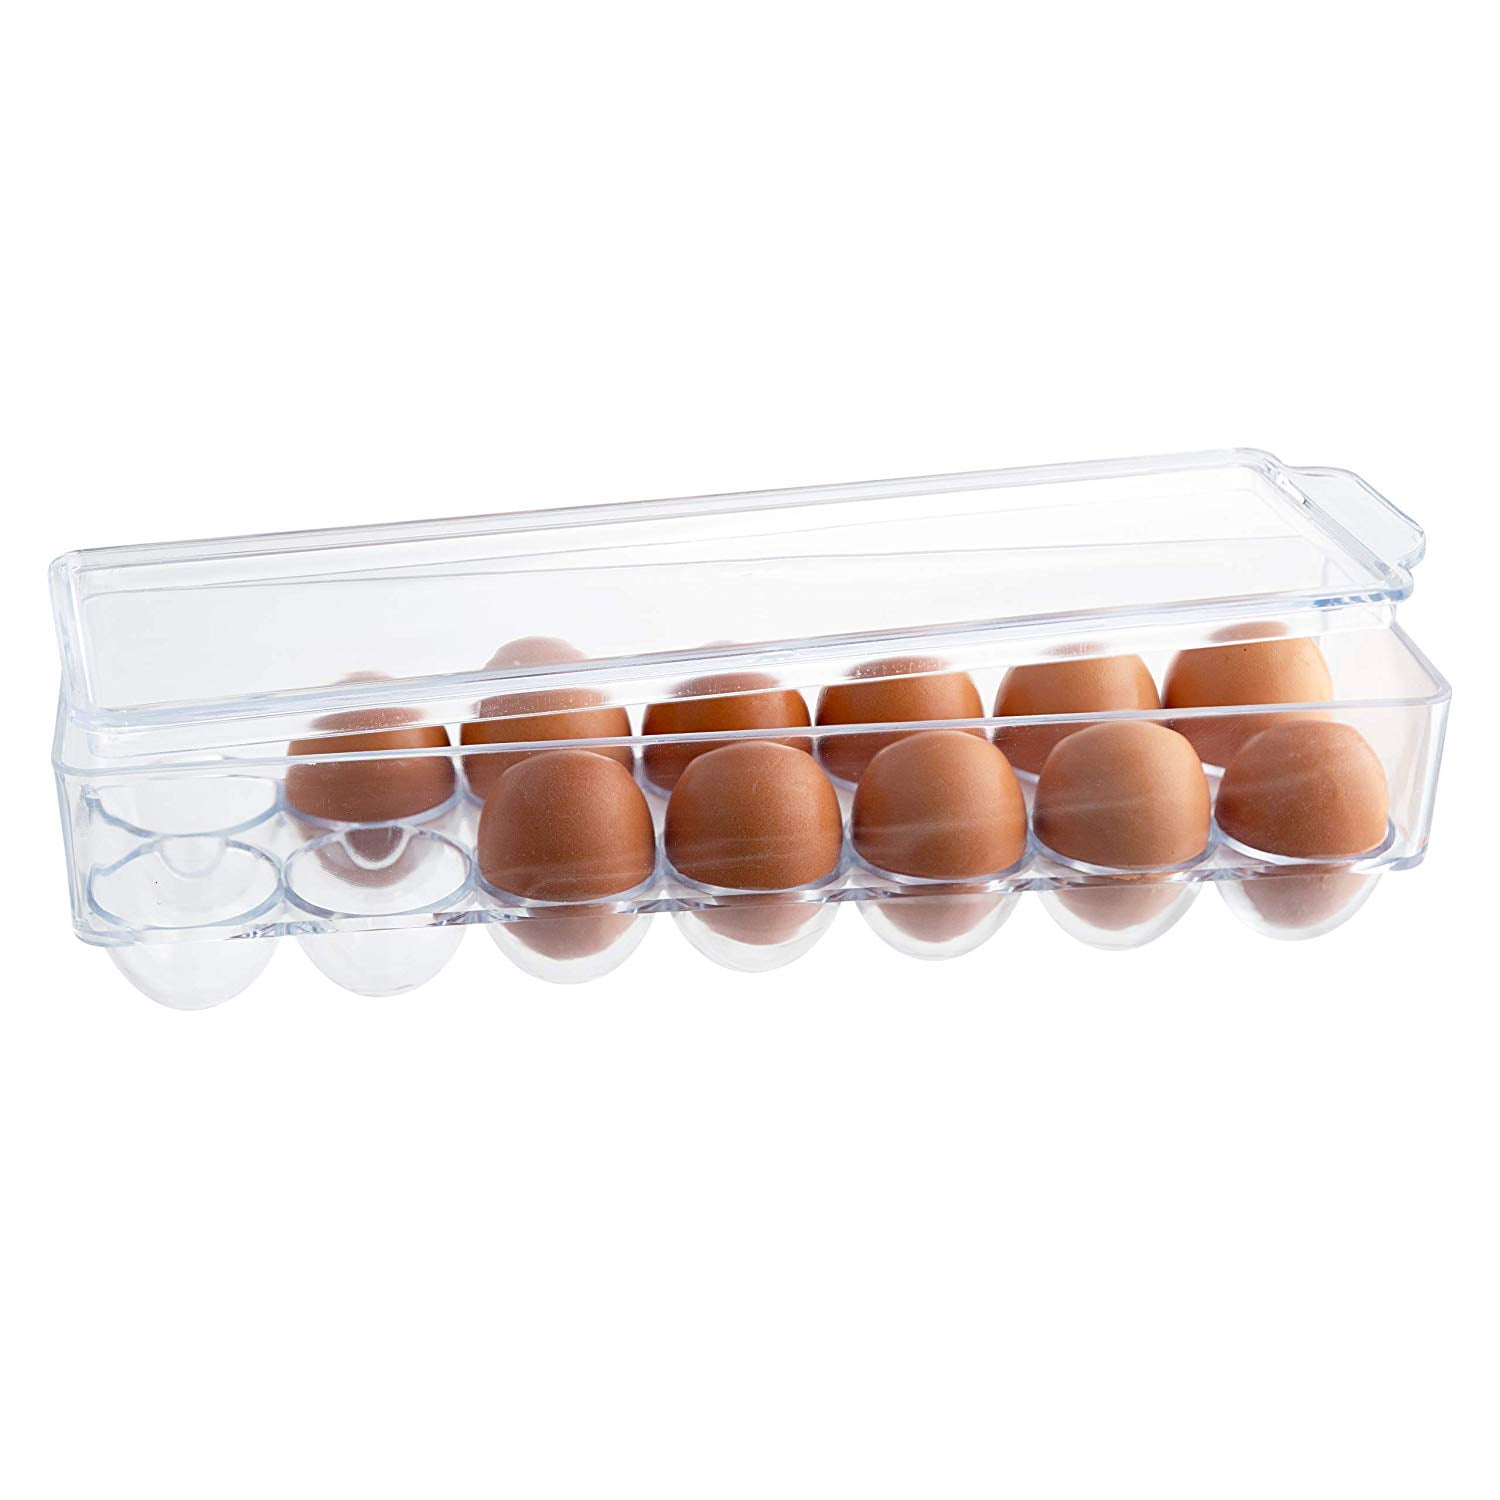 Mainstays Clear Egg Holder (Holds 14 Eggs)- Clear Plastic 